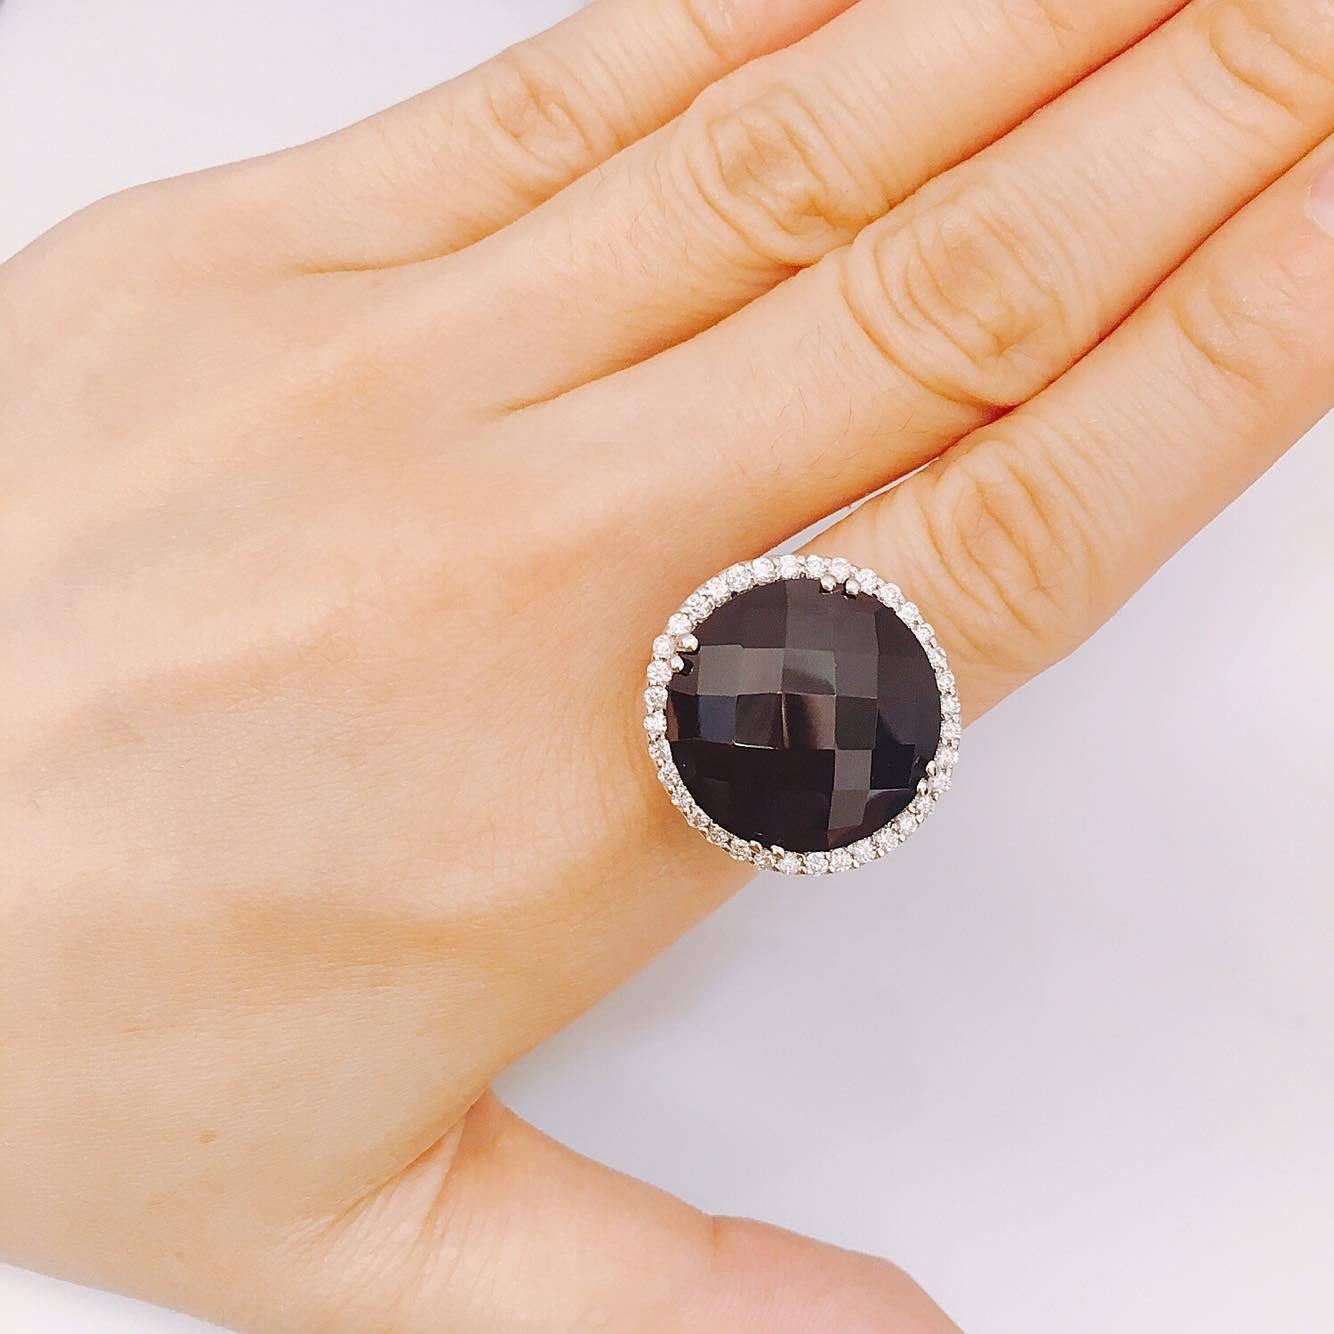 21.00ct Smokey Quartz Center
1.00ct t.w. Diamond VVs Clarity F color conflict free diamonds. If you prefer this piece in all white/yellow/rose gold and blackened gold, you can order it that way as well. 
All finger sizes available at no additional